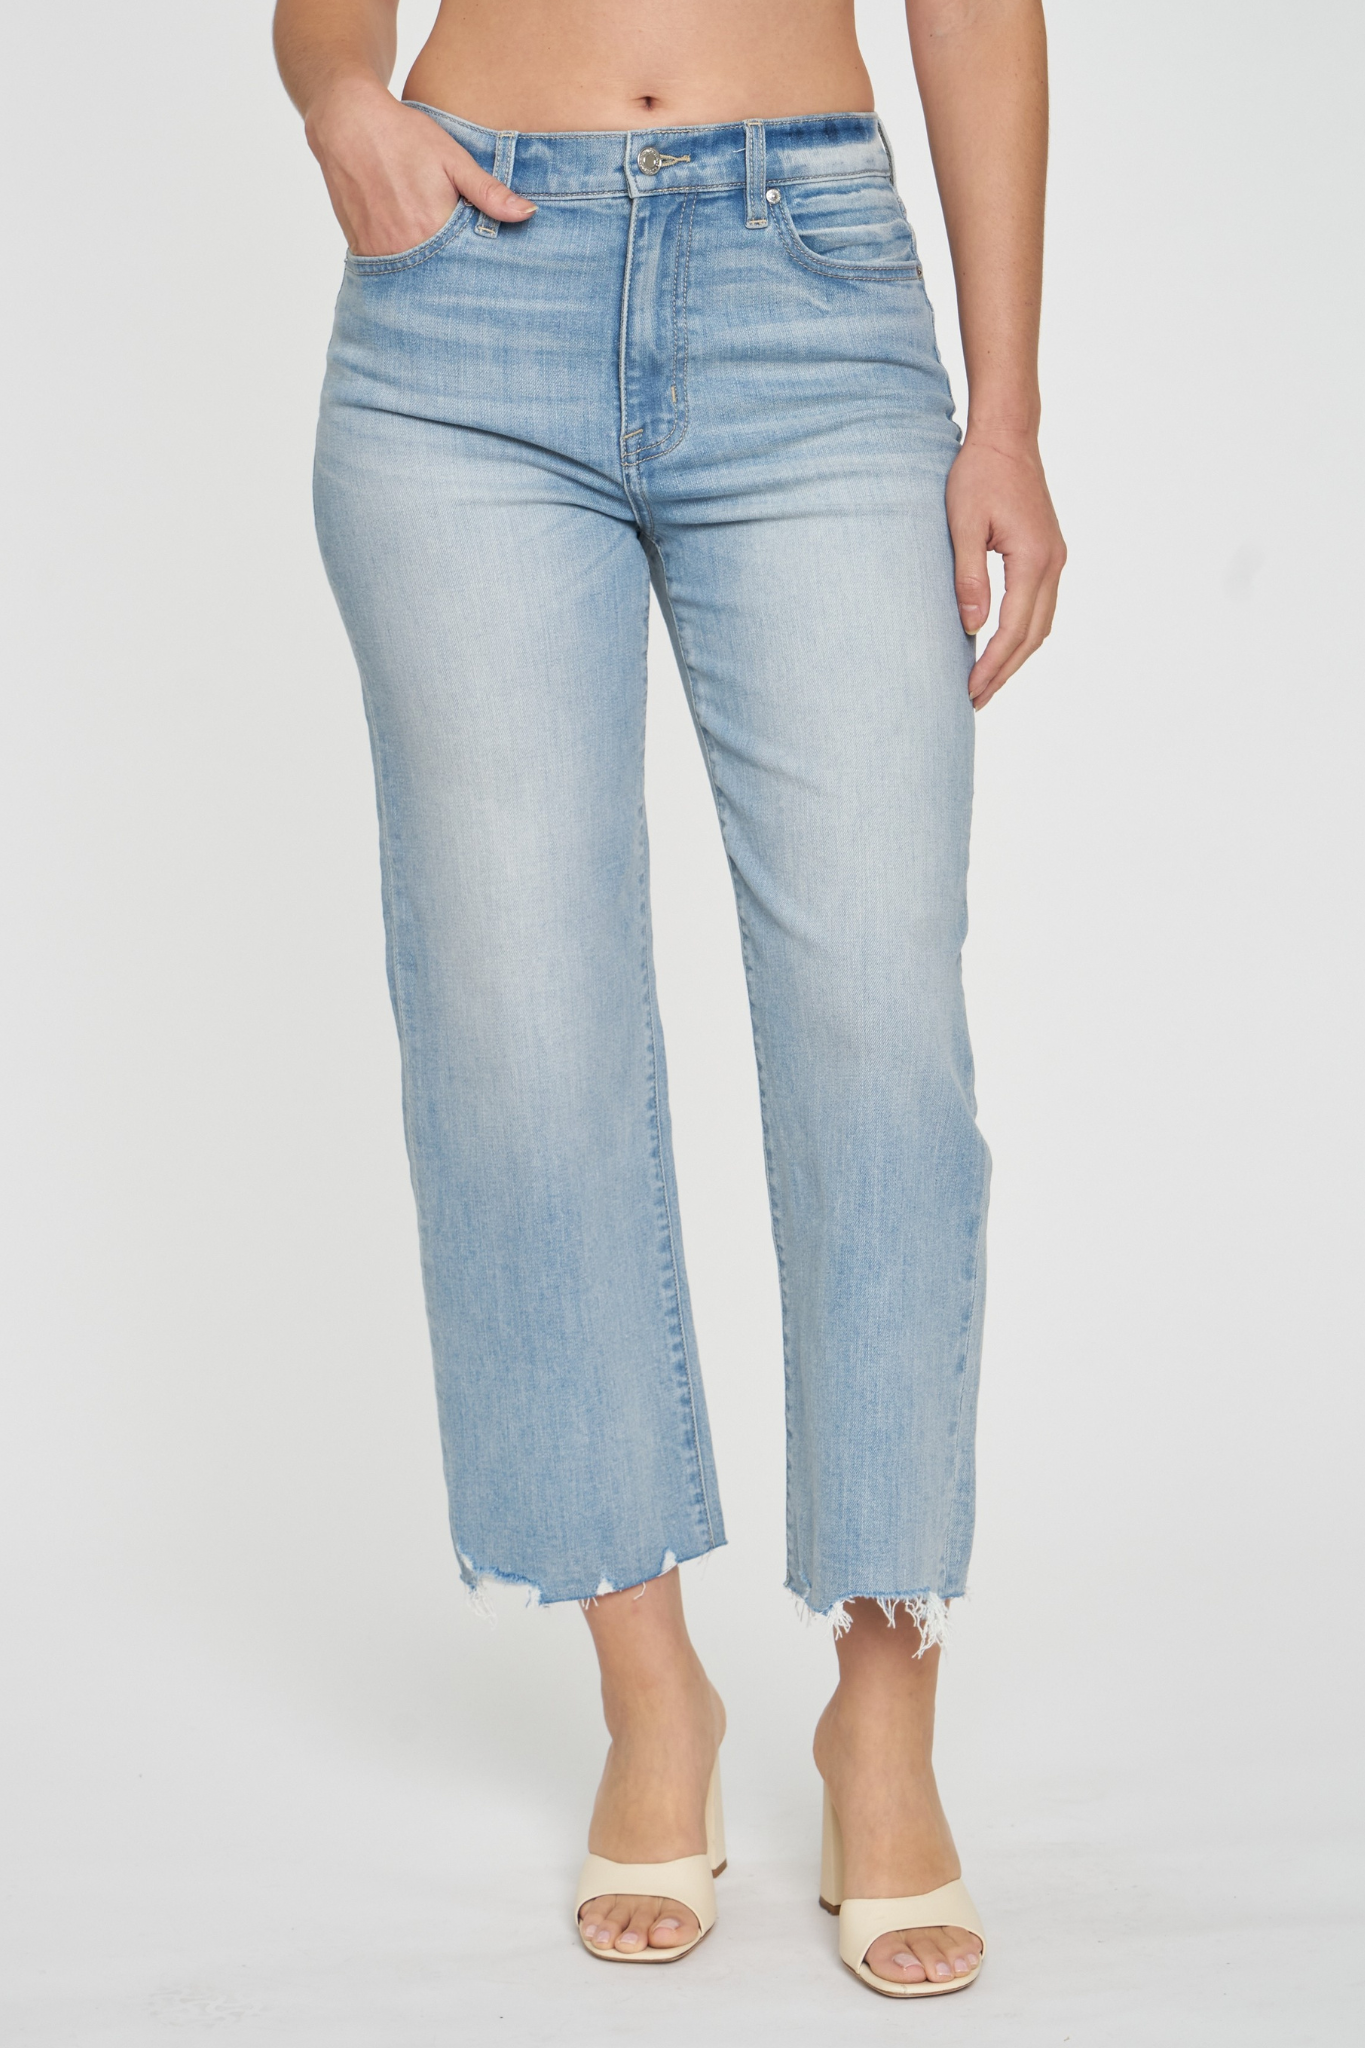 Eunina Dawn Wide Leg Jeans in Sunsets